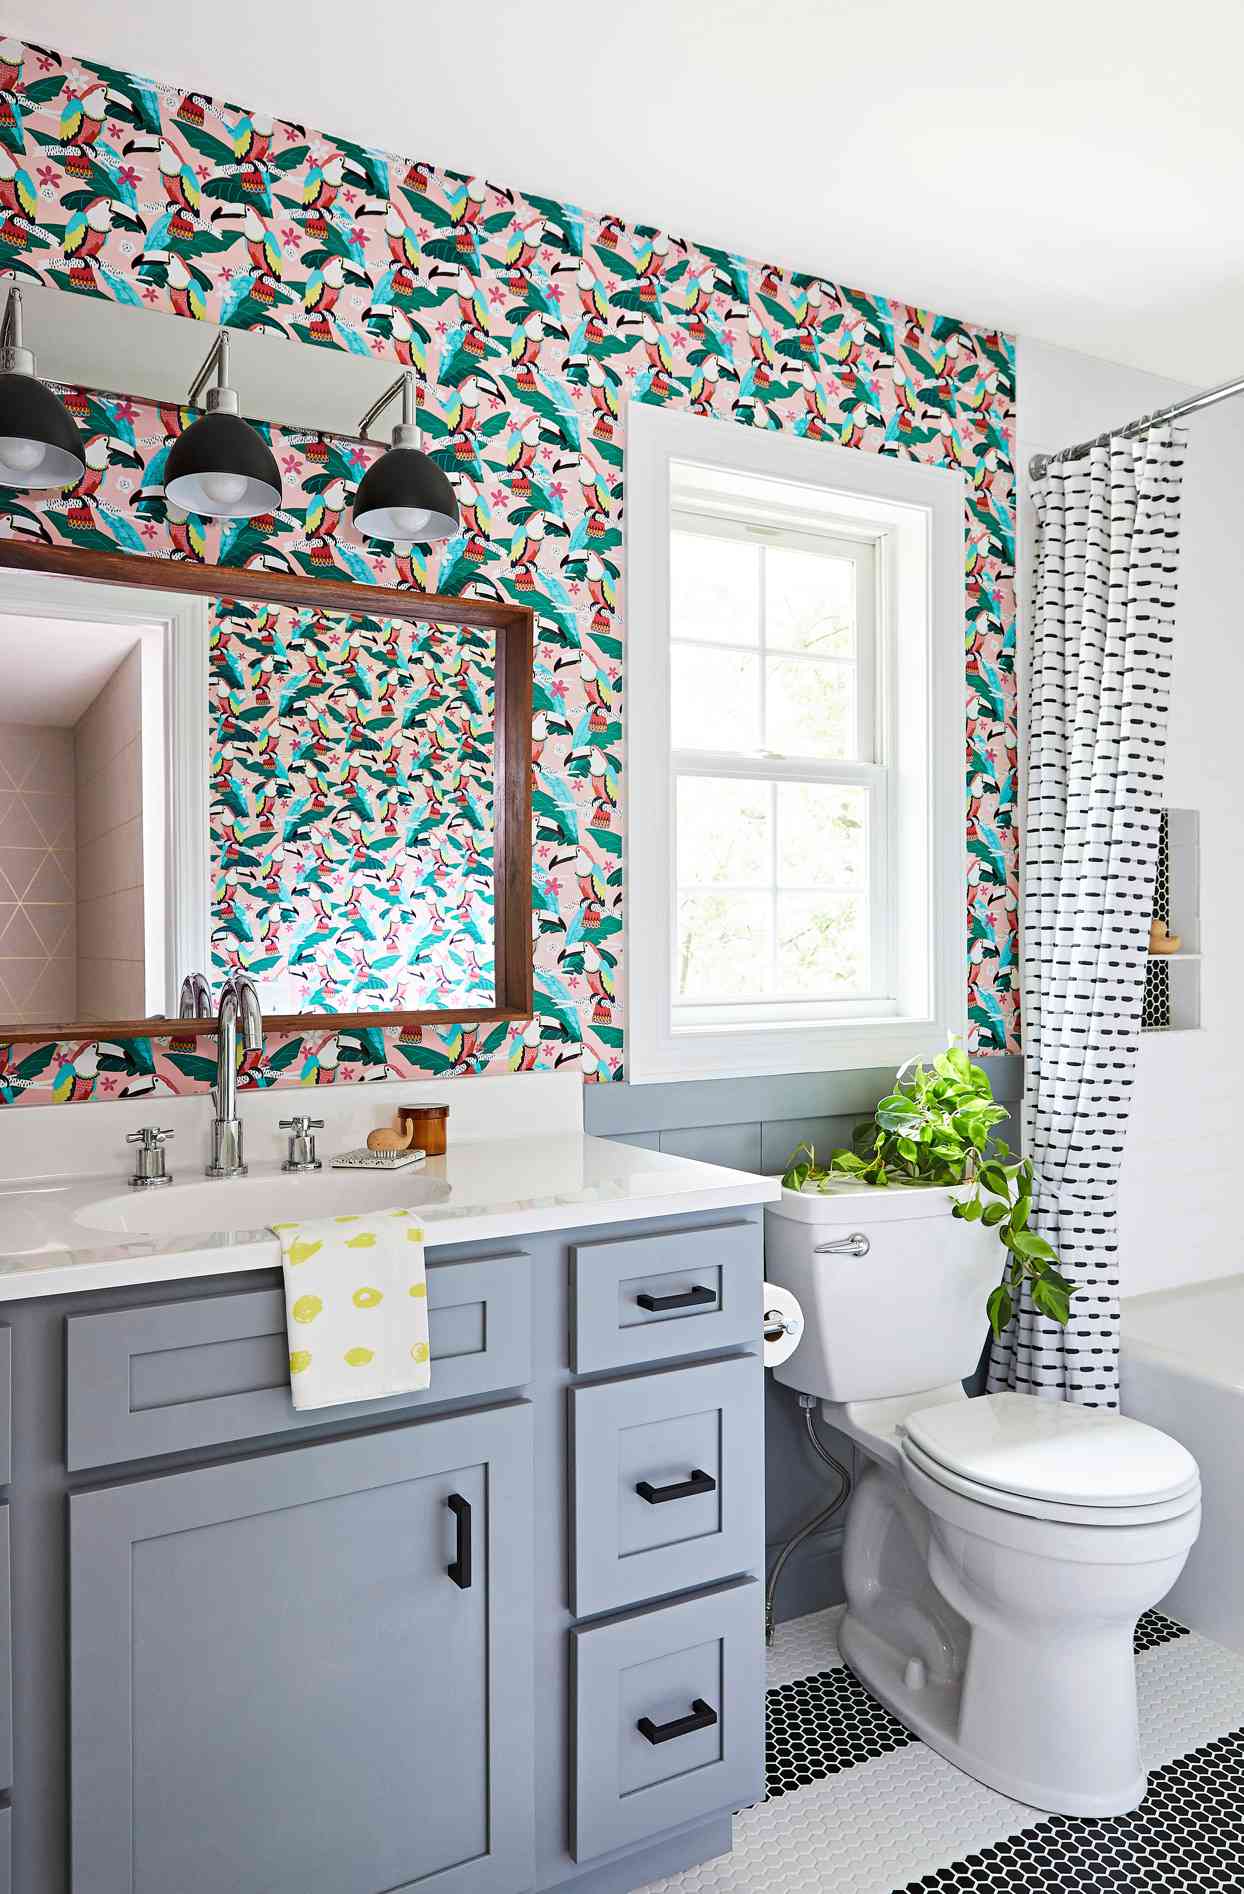 bathroom with toucan pattern wallpaper